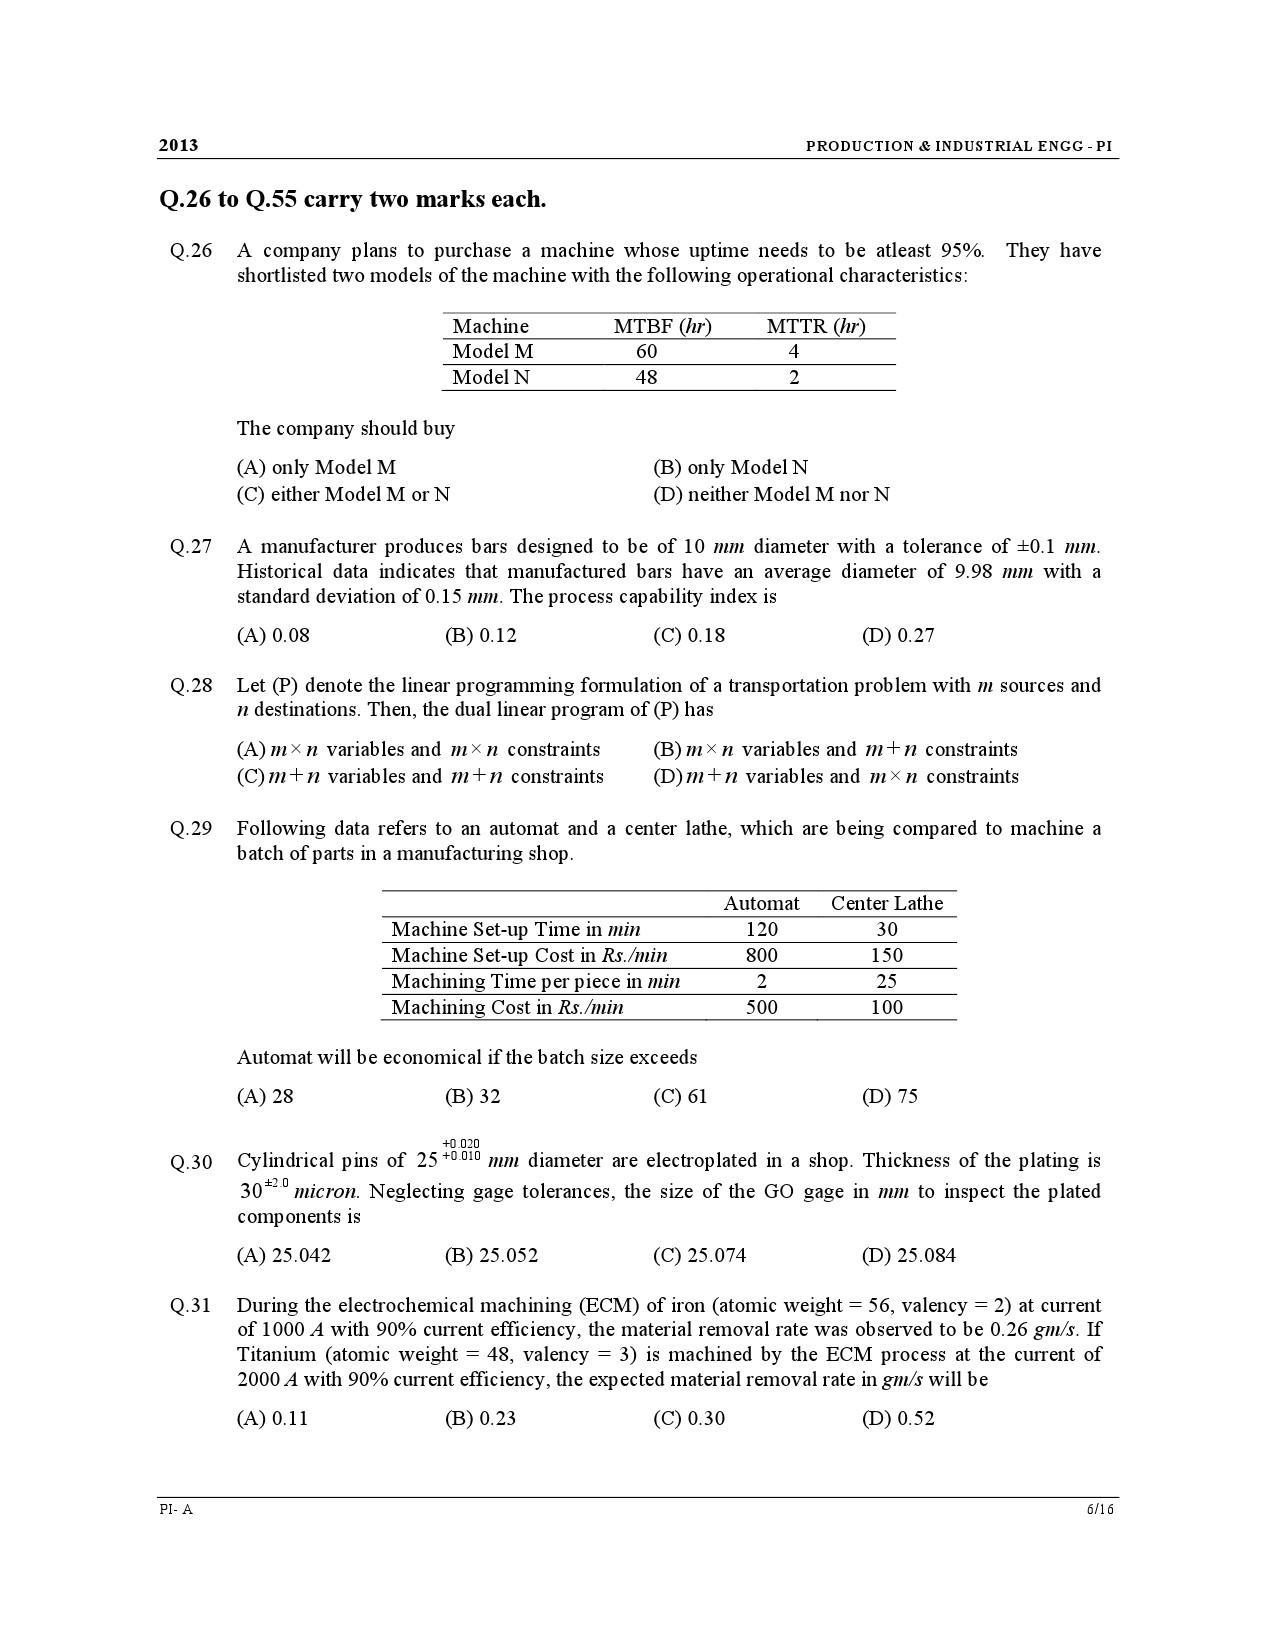 GATE Exam Question Paper 2013 Production and Industrial Engineering 6